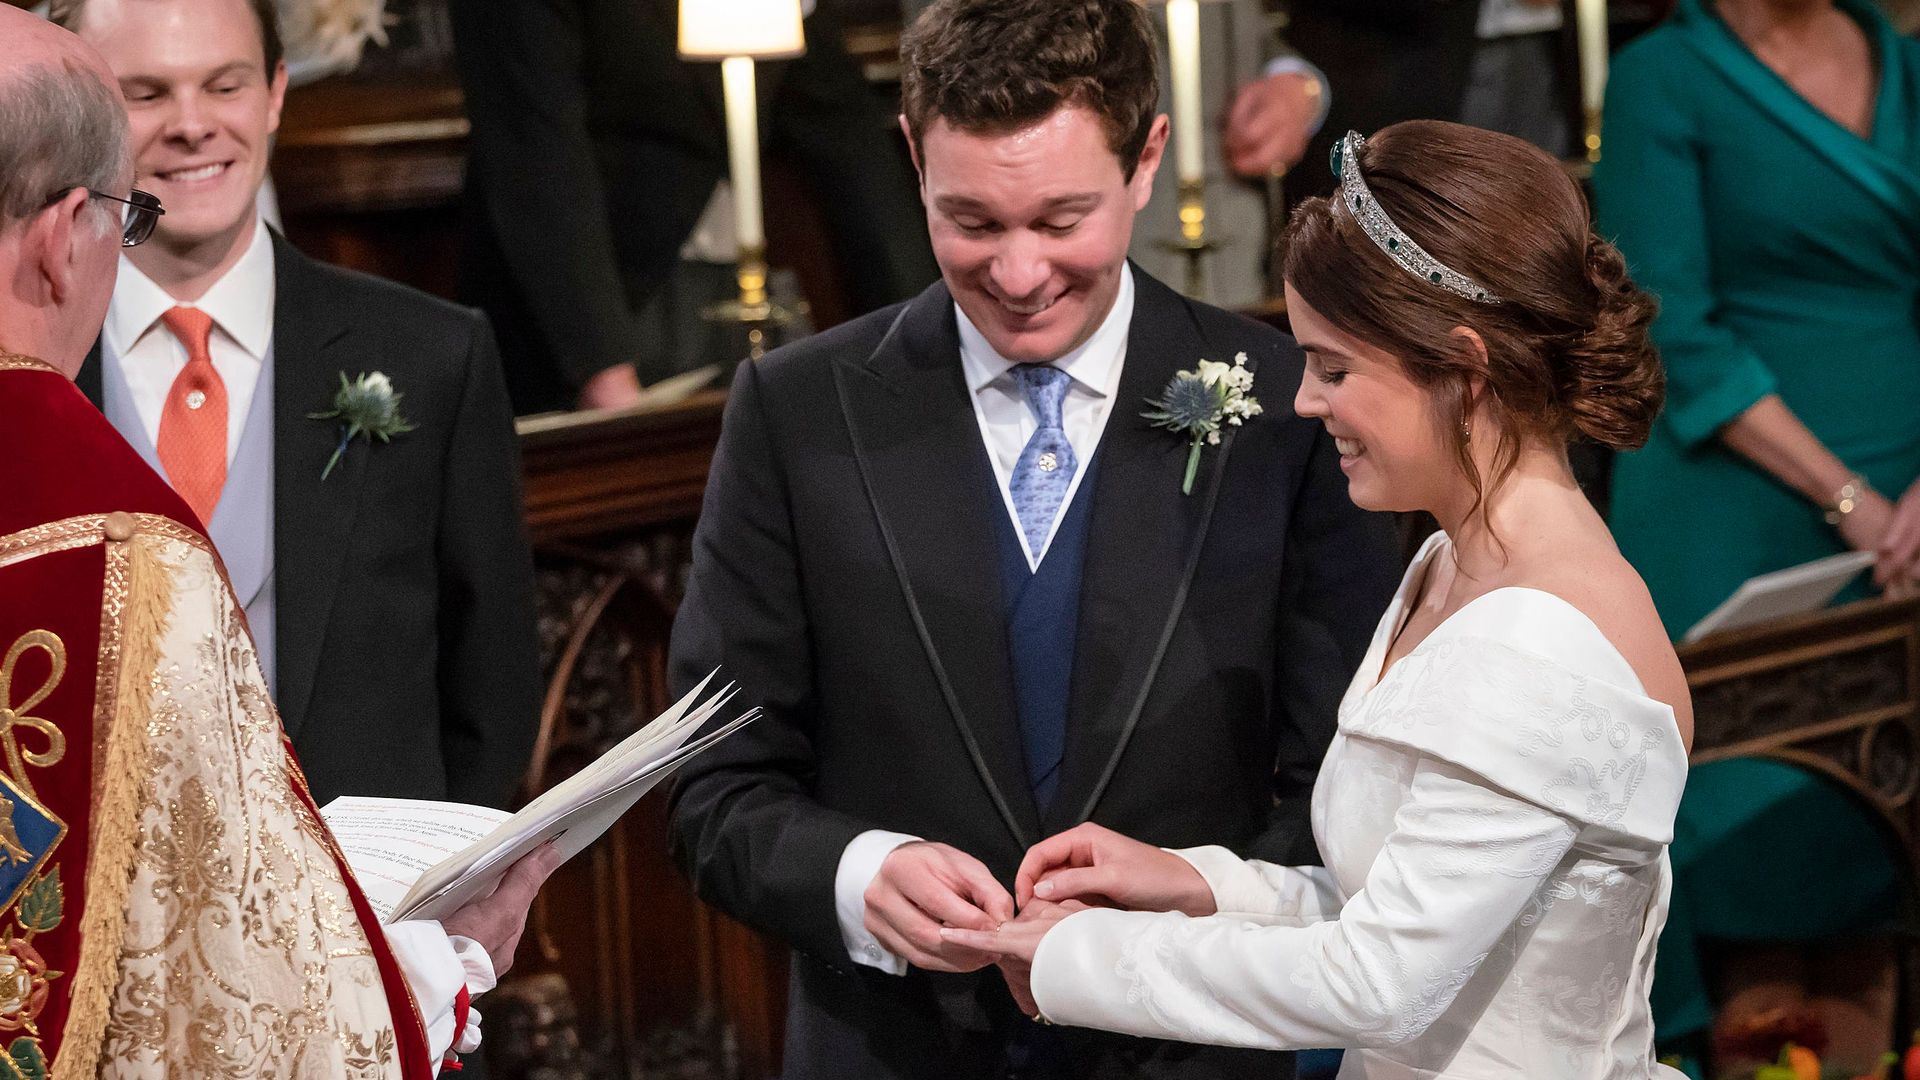 Jack Brooksbank places a wedding band on the finger of his bride, Britain's Princess Eugenie of York during their wedding ceremony 